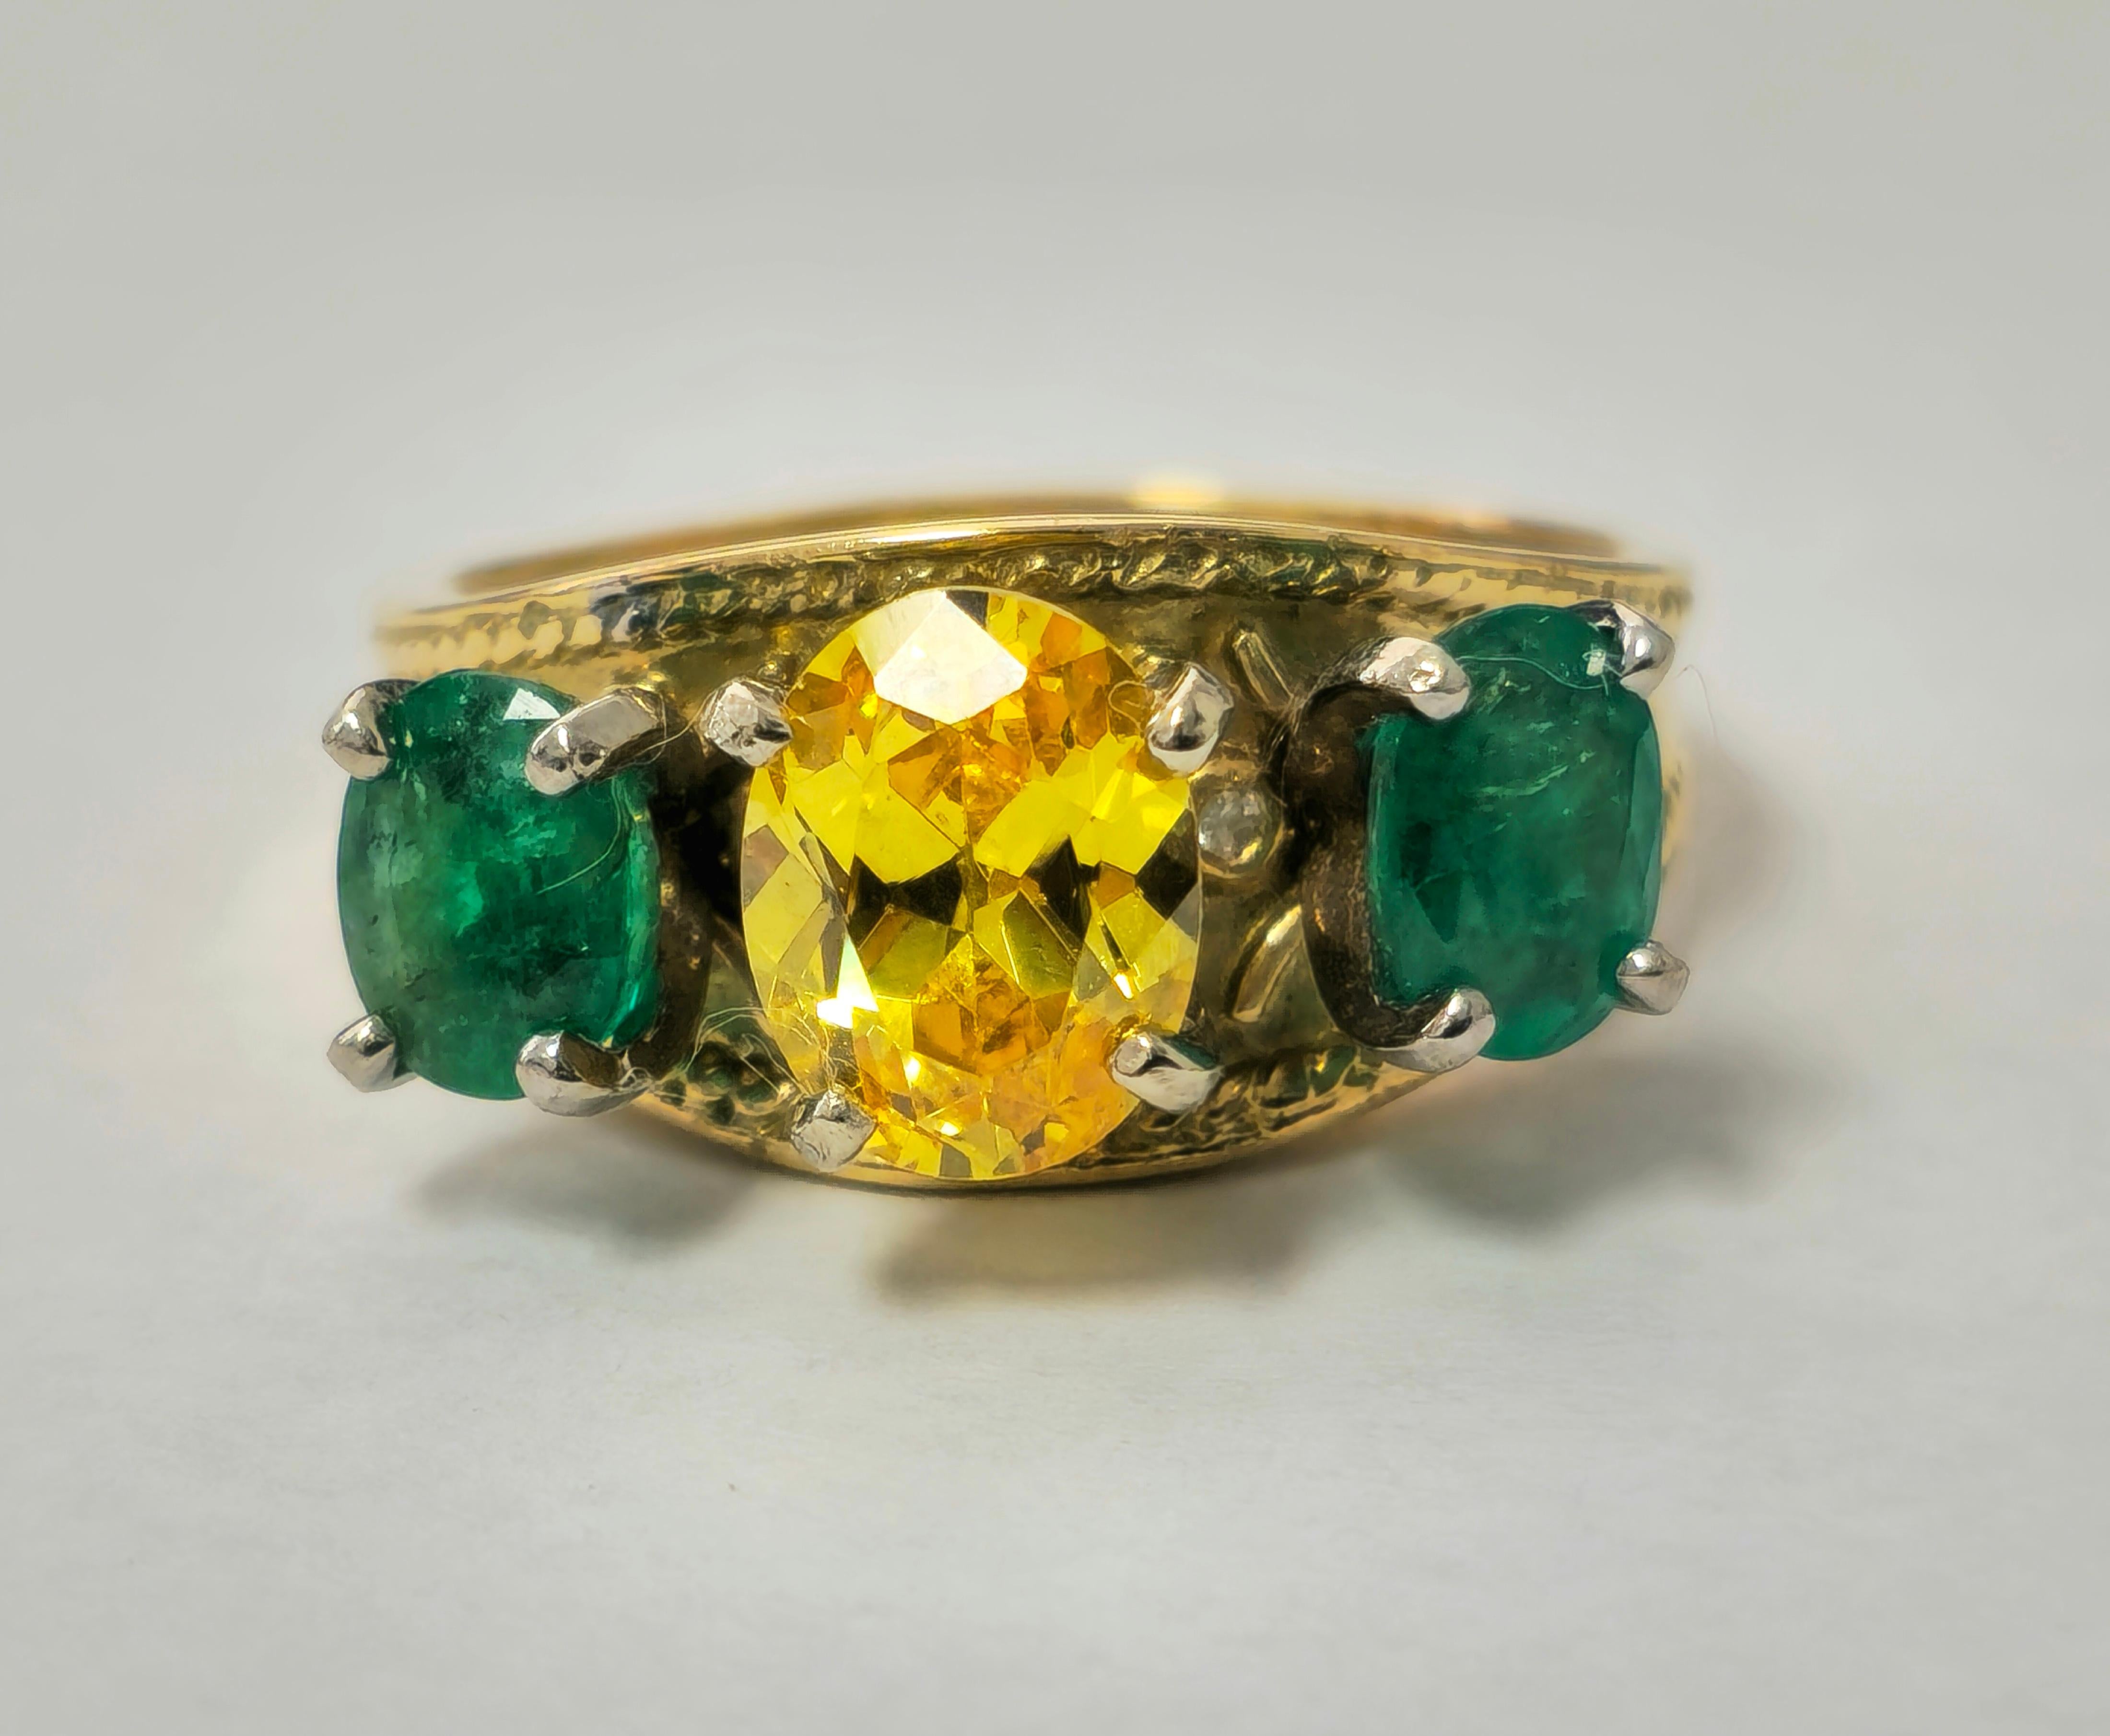 Crafted in 18k yellow gold, this enchanting ring features a 3.76 carat yellow sapphire and 1.20 carat total emerald, both 100% natural earth mined gemstones. With an oval shape and a total weight of 8.20 grams, it's a captivating cocktail ring